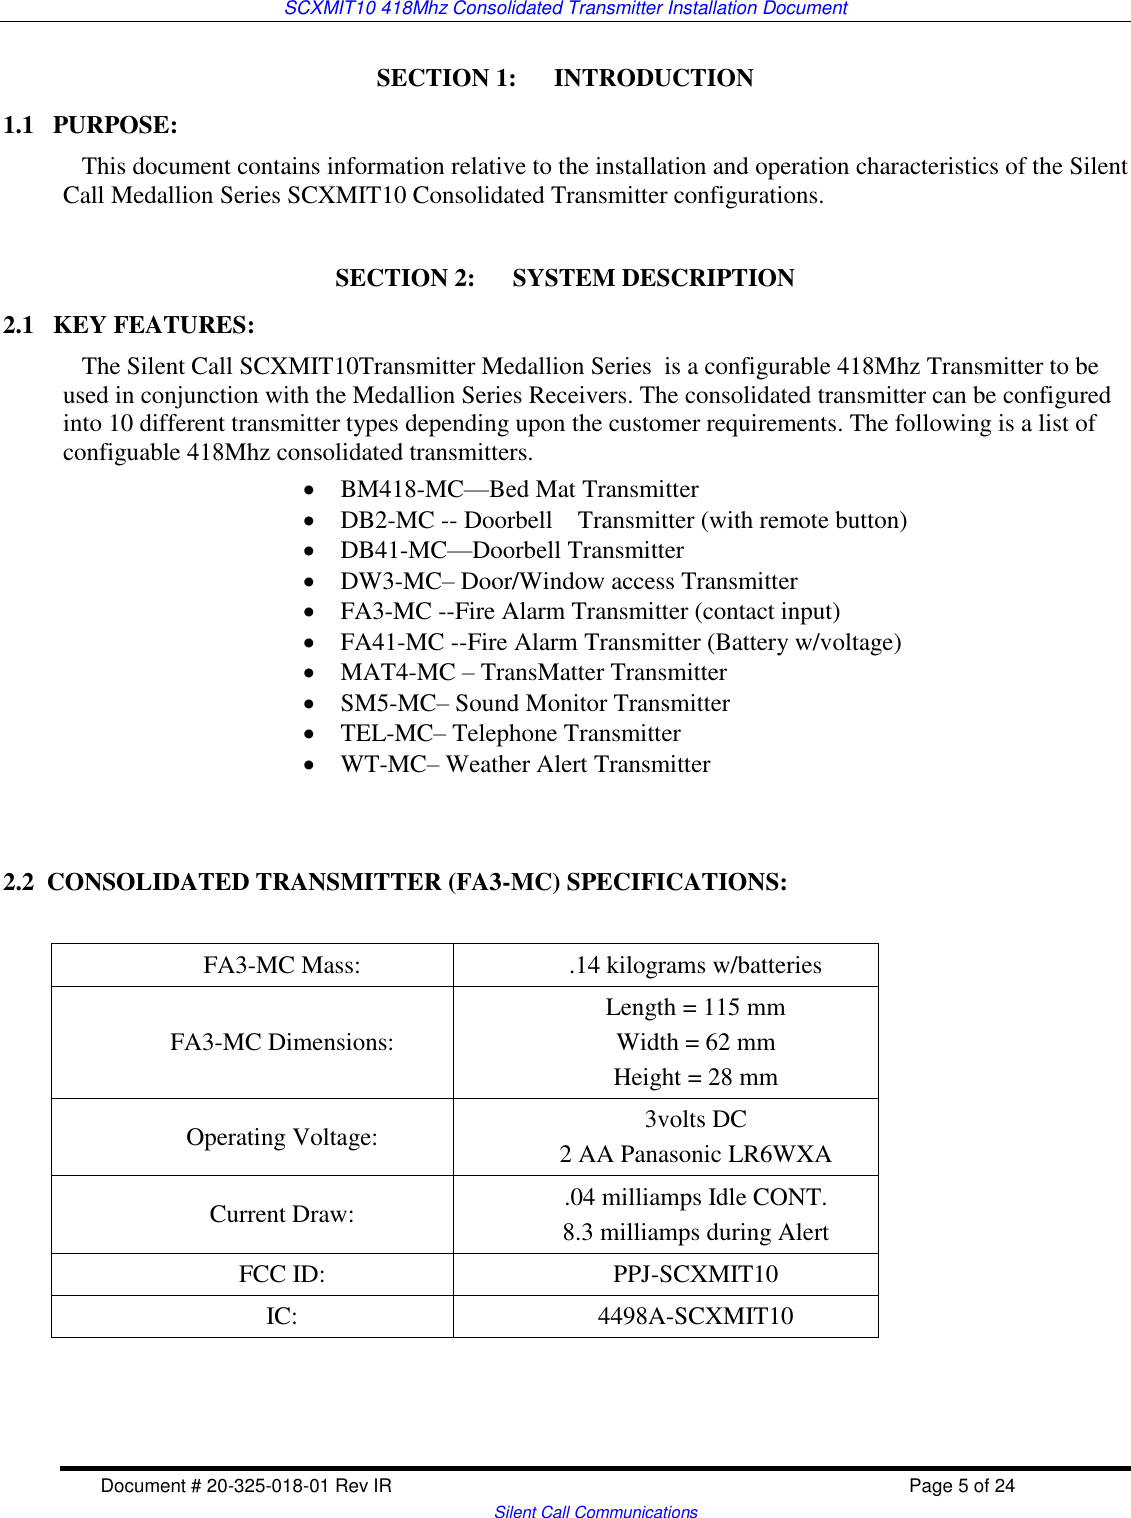 SCXMIT10 418Mhz Consolidated Transmitter Installation Document  Document # 20-325-018-01 Rev IR    Page 5 of 24   Silent Call Communications SECTION 1:      INTRODUCTION 1.1   PURPOSE:    This document contains information relative to the installation and operation characteristics of the Silent Call Medallion Series SCXMIT10 Consolidated Transmitter configurations.   SECTION 2:      SYSTEM DESCRIPTION 2.1   KEY FEATURES:    The Silent Call SCXMIT10Transmitter Medallion Series  is a configurable 418Mhz Transmitter to be used in conjunction with the Medallion Series Receivers. The consolidated transmitter can be configured into 10 different transmitter types depending upon the customer requirements. The following is a list of configuable 418Mhz consolidated transmitters.  BM418-MC—Bed Mat Transmitter  DB2-MC -- Doorbell    Transmitter (with remote button)  DB41-MC—Doorbell Transmitter  DW3-MC– Door/Window access Transmitter  FA3-MC --Fire Alarm Transmitter (contact input)  FA41-MC --Fire Alarm Transmitter (Battery w/voltage)  MAT4-MC – TransMatter Transmitter  SM5-MC– Sound Monitor Transmitter  TEL-MC– Telephone Transmitter  WT-MC– Weather Alert Transmitter   2.2  CONSOLIDATED TRANSMITTER (FA3-MC) SPECIFICATIONS:  FA3-MC Mass: .14 kilograms w/batteries FA3-MC Dimensions: Length = 115 mm Width = 62 mm Height = 28 mm  Operating Voltage: 3volts DC 2 AA Panasonic LR6WXA  Current Draw: .04 milliamps Idle CONT. 8.3 milliamps during Alert  FCC ID: PPJ-SCXMIT10 IC: 4498A-SCXMIT10  